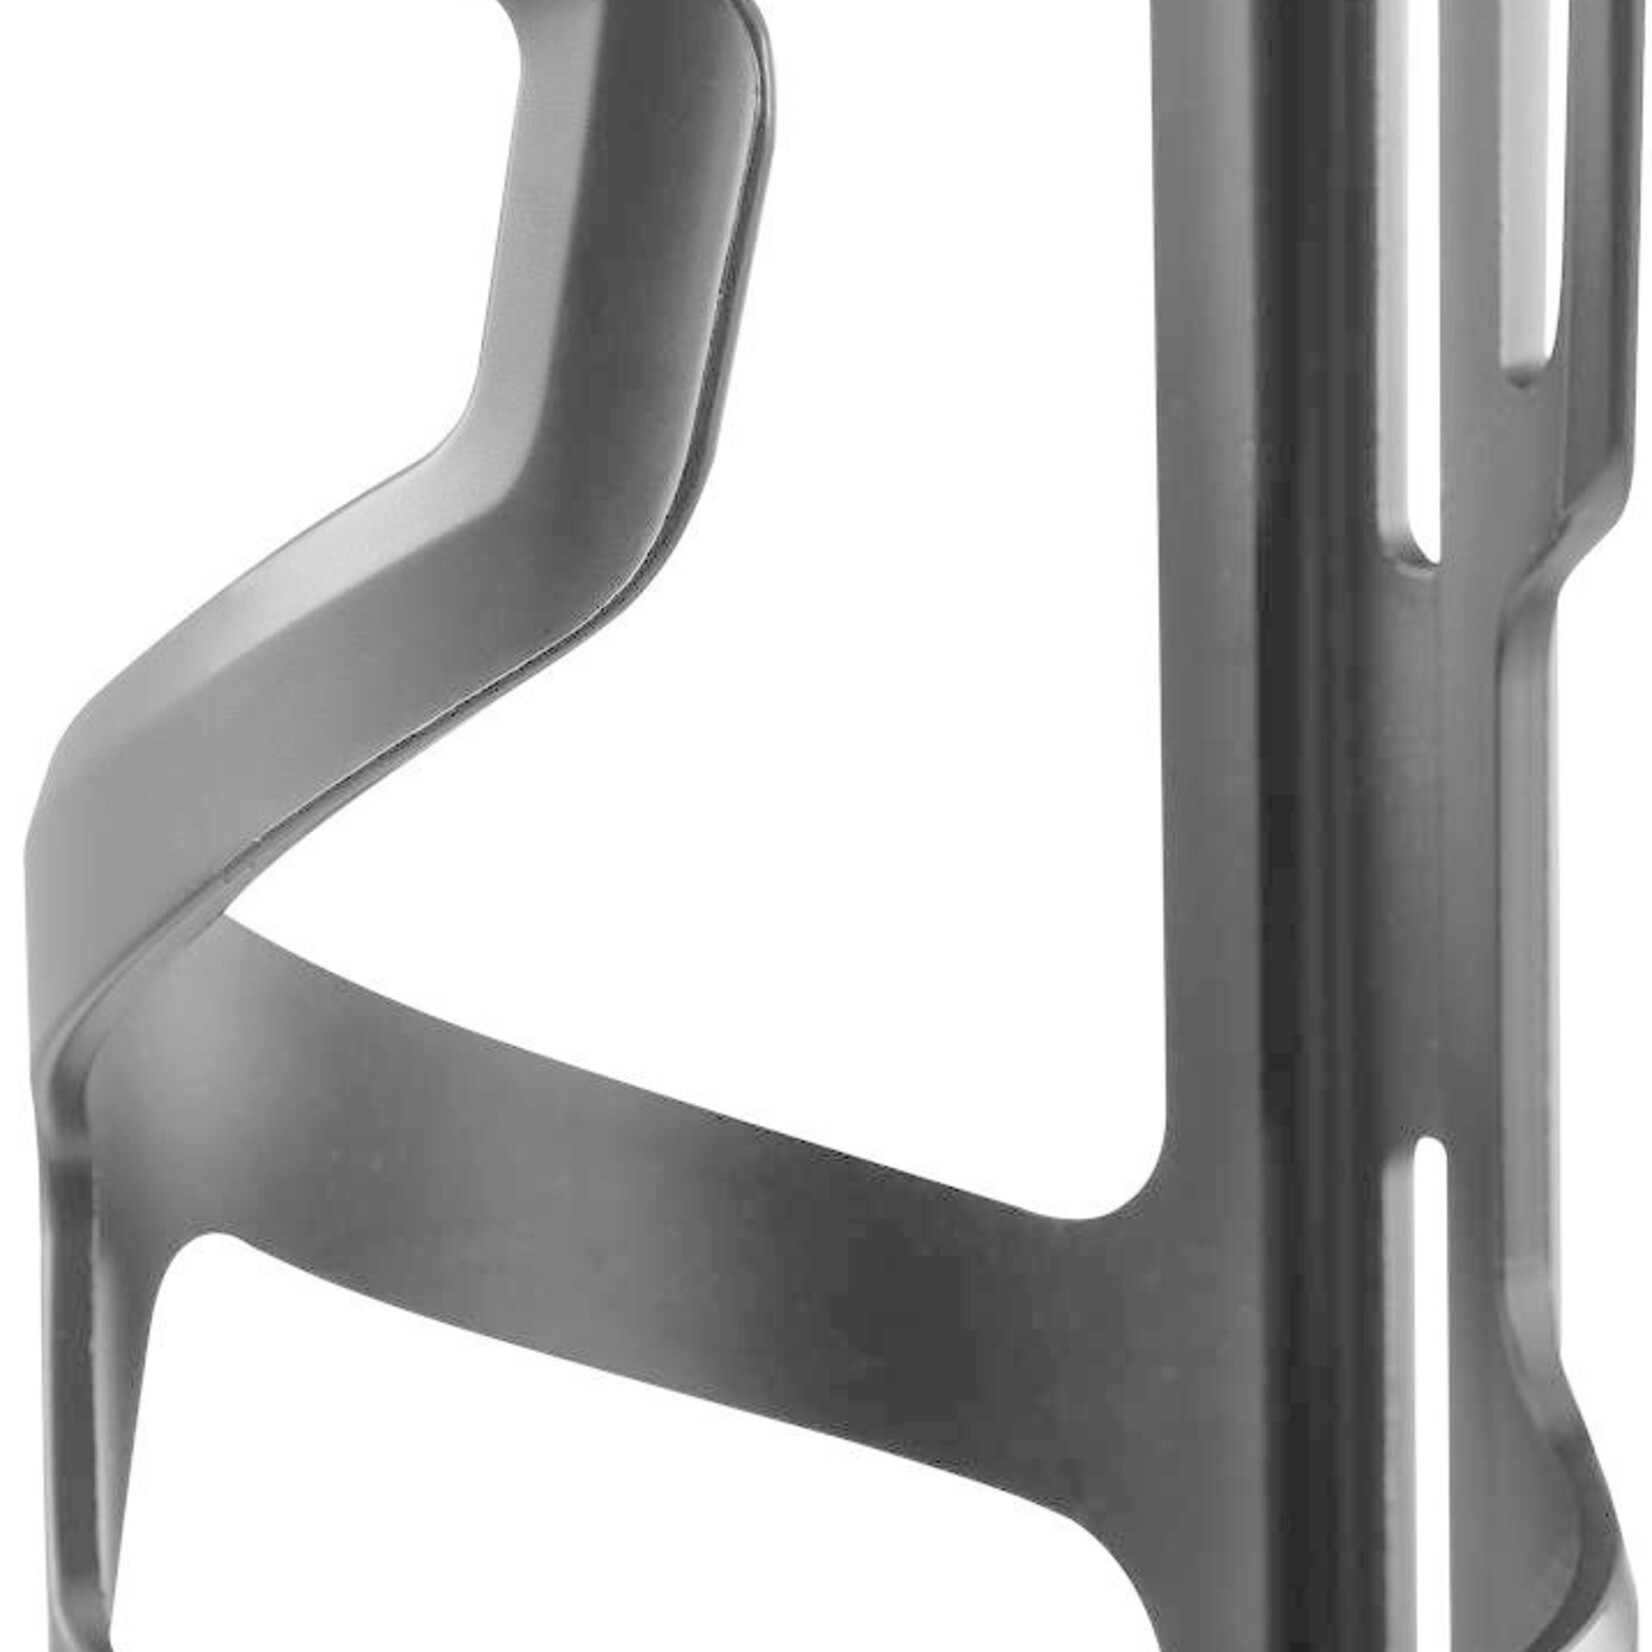 Giant Giant Water Bottle Cage, Airway Sidepull